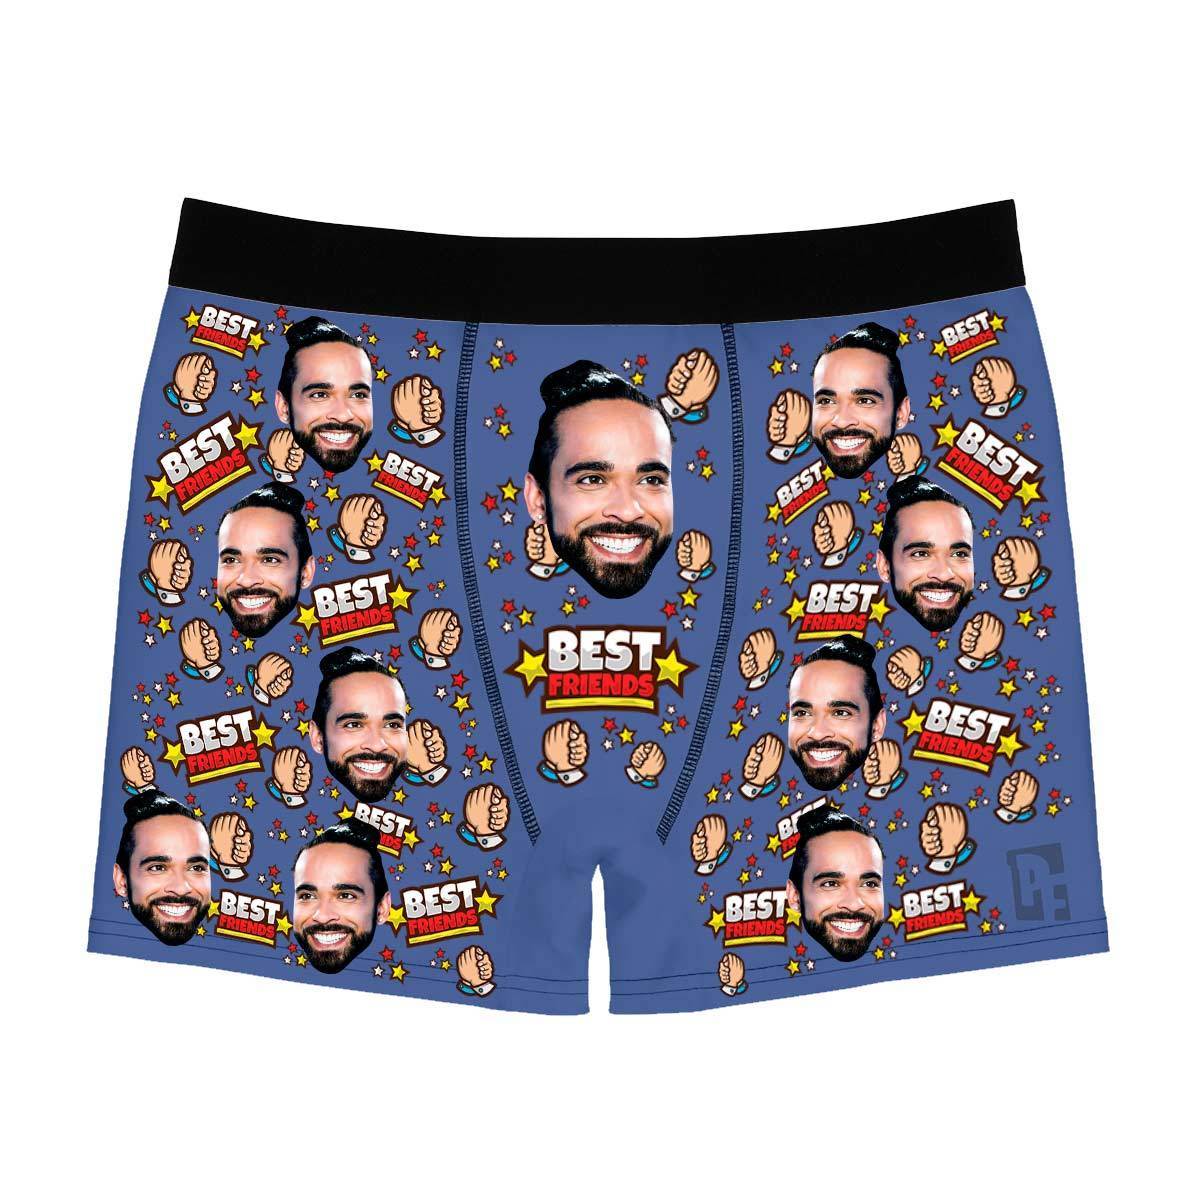 Darkblue Best Friends men's boxer briefs personalized with photo printed on them